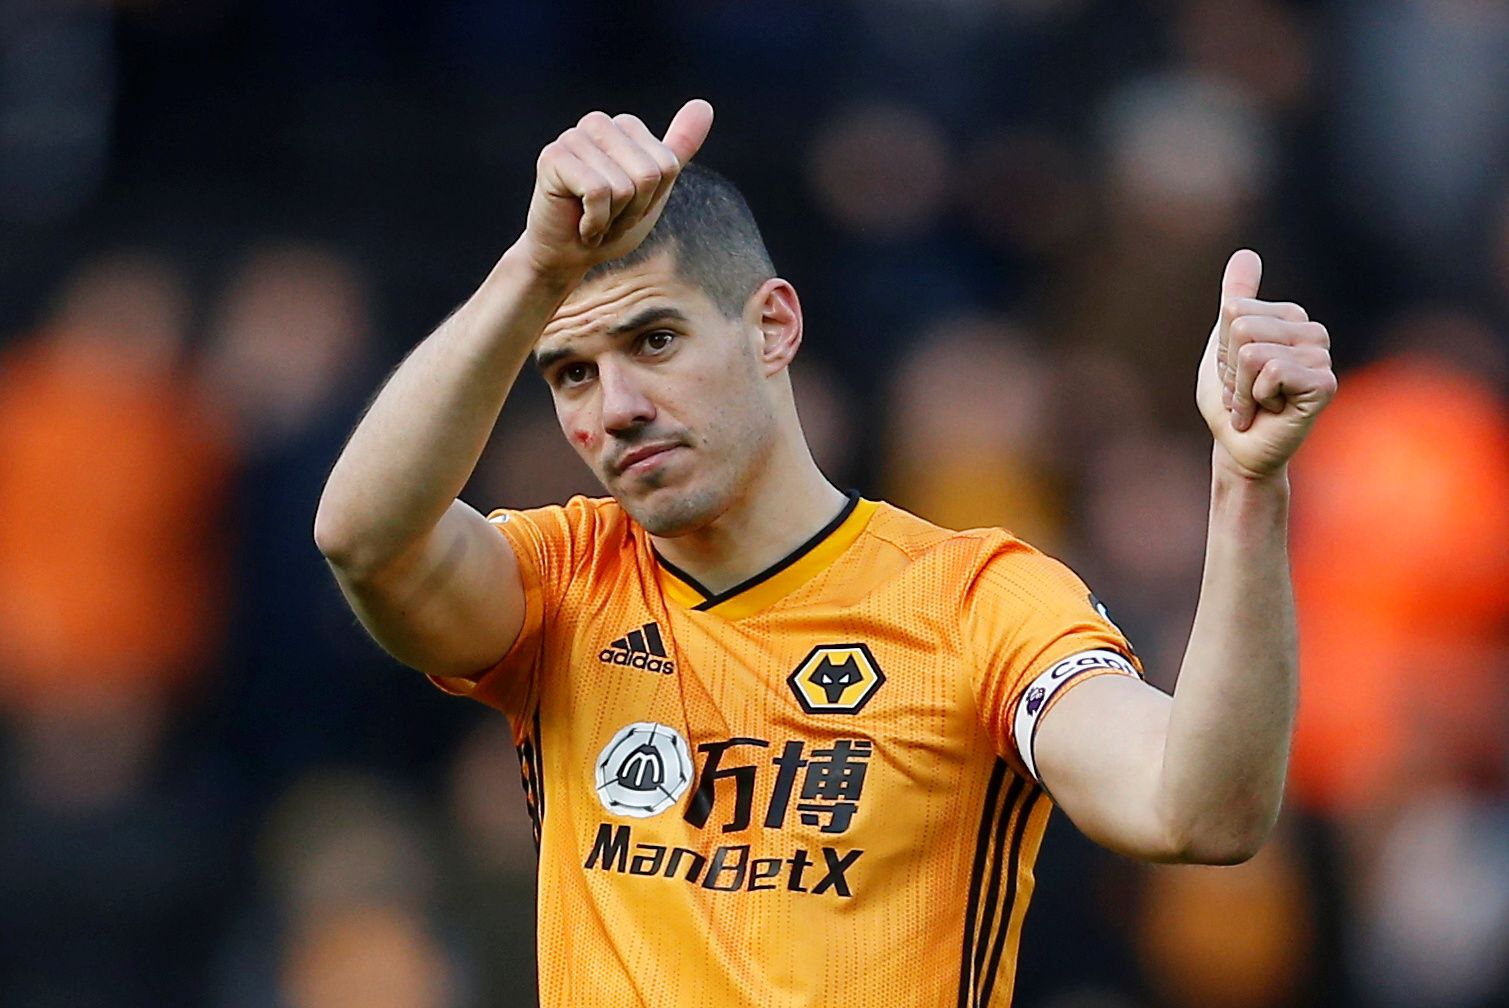 Soccer Football - Premier League - Wolverhampton Wanderers v Norwich City - Molineux Stadium, Wolverhampton, Britain - February 23, 2020  Wolverhampton Wanderers' Conor Coady celebrates after the match   Action Images via Reuters/Craig Brough  EDITORIAL USE ONLY. No use with unauthorized audio, video, data, fixture lists, club/league logos or 